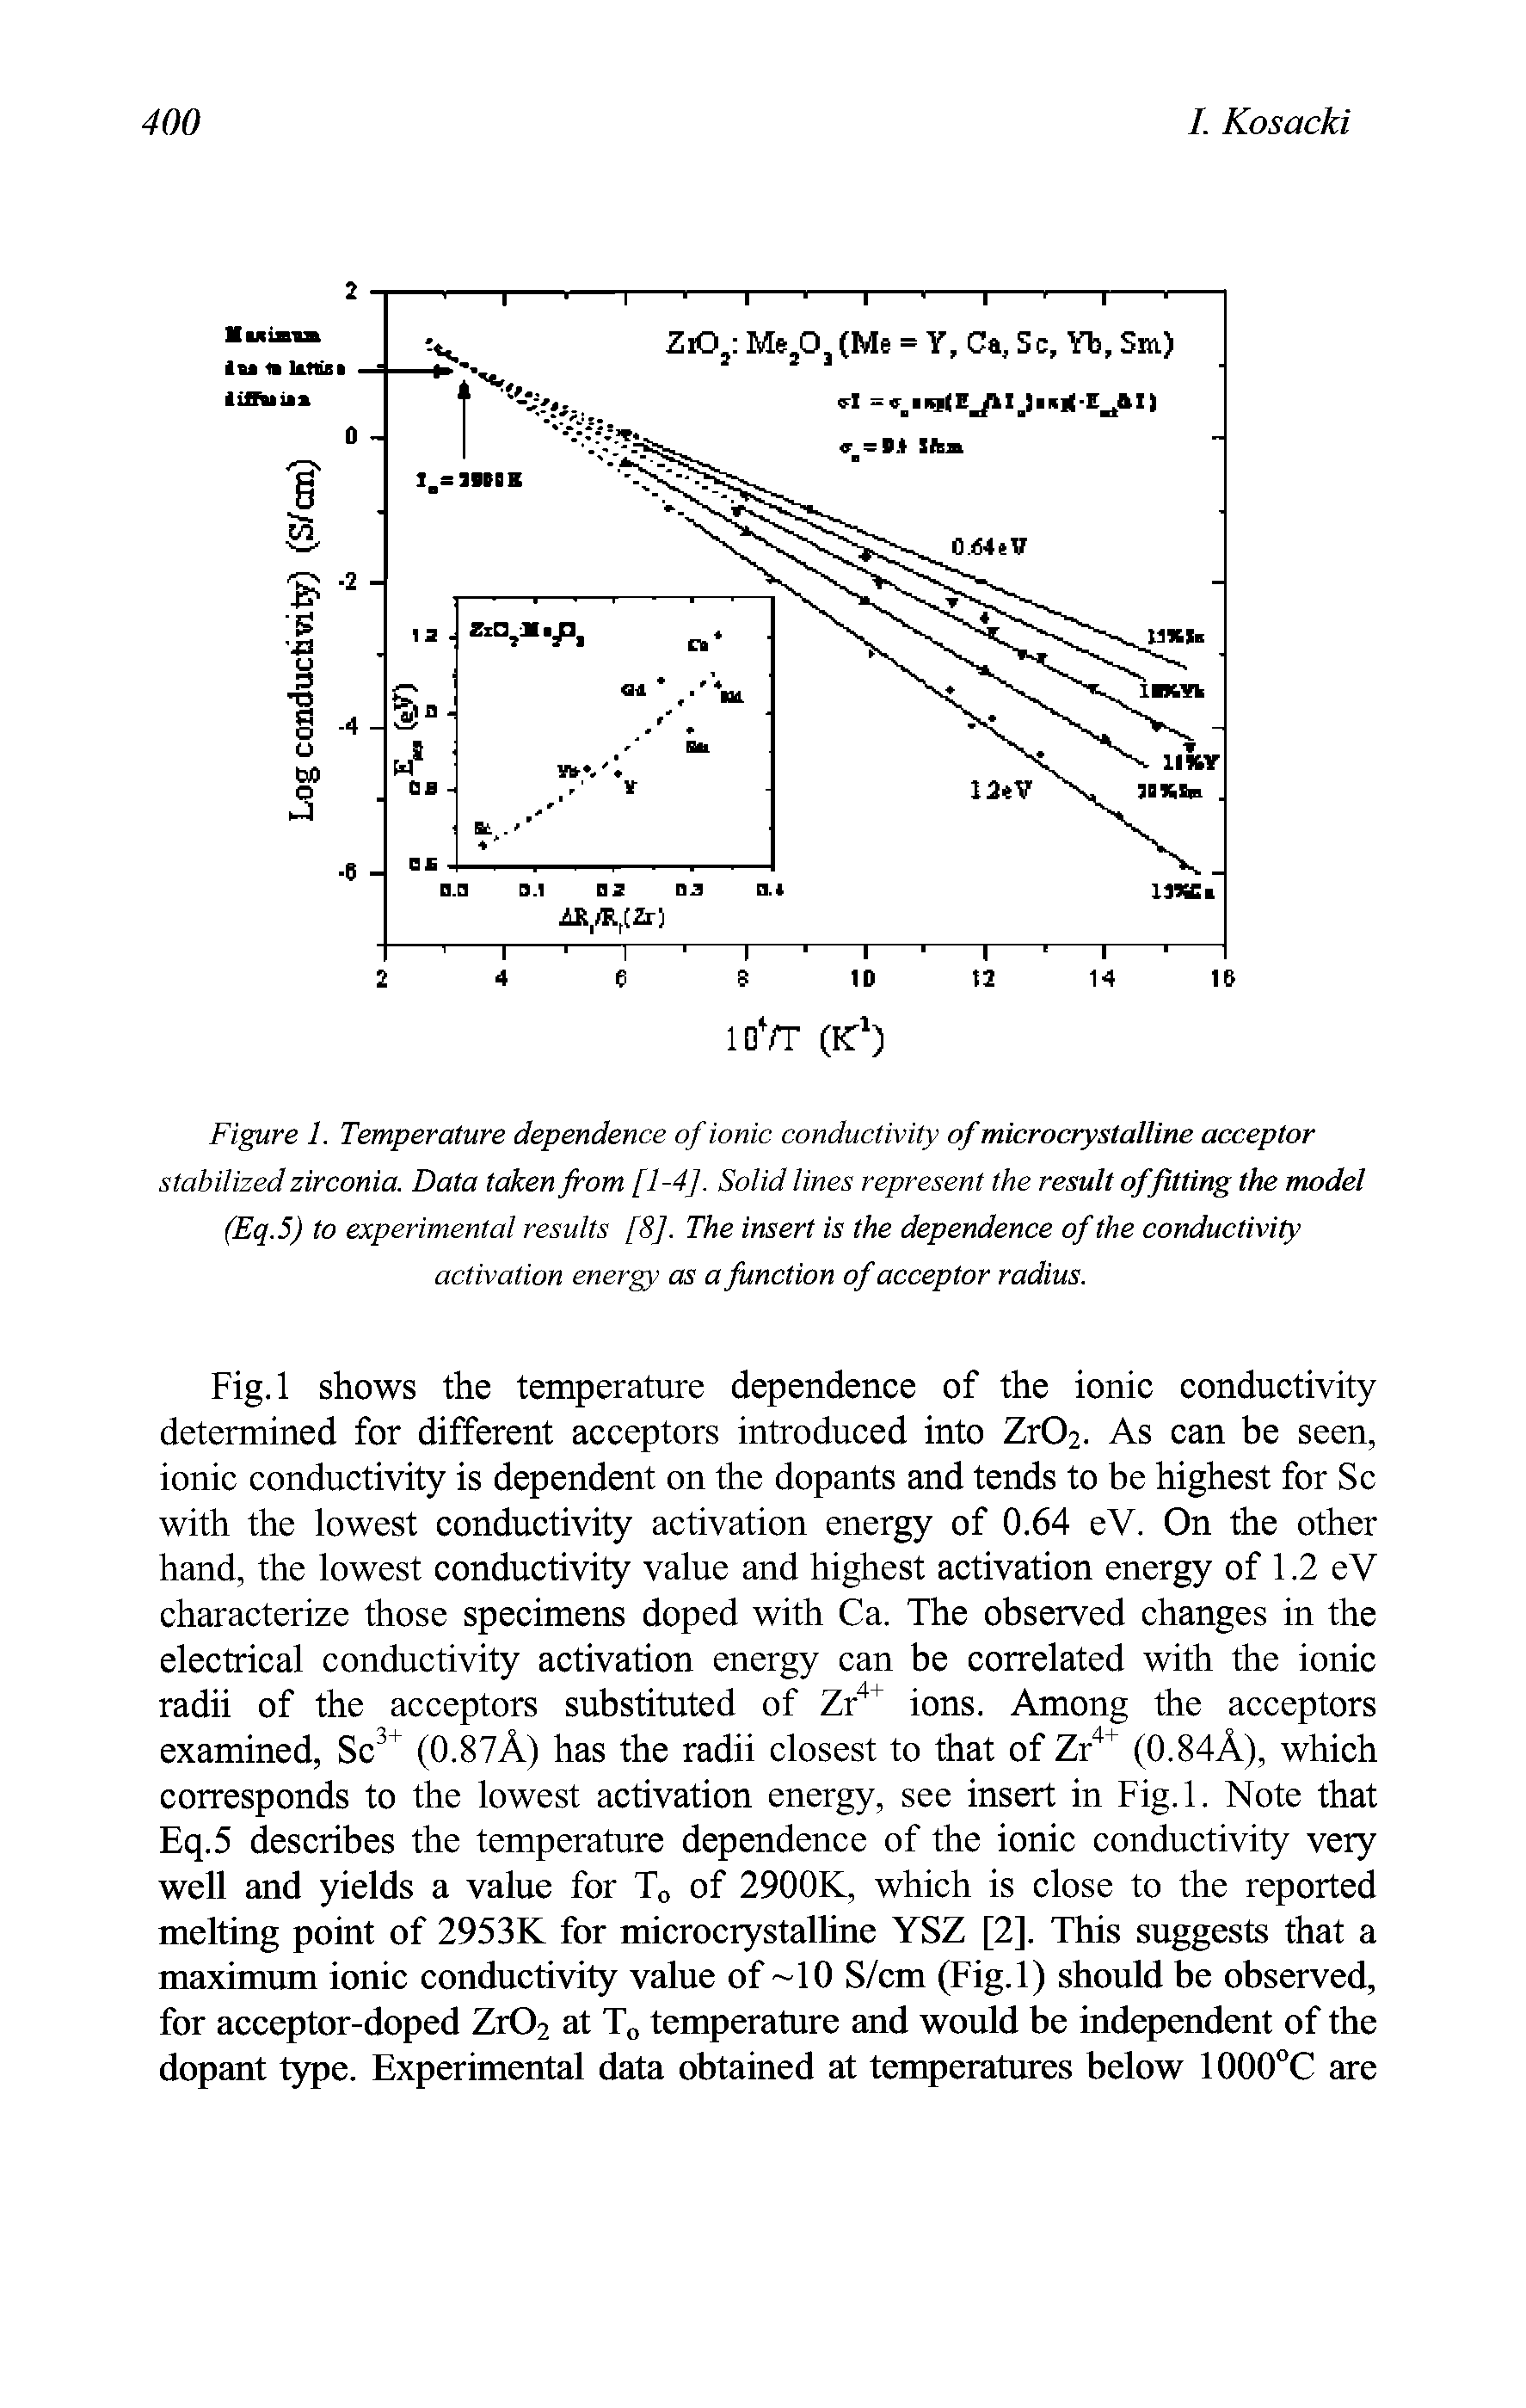 Figure 1. Temperature dependence of ionic conductivity of microcrystalline acceptor stabilized zirconia. Data taken from [1-4], Solid lines represent the result of fitting the model (Eq.5) to experimental results [8], The insert is the dependence of the conductivity activation energy as a function of acceptor radius.